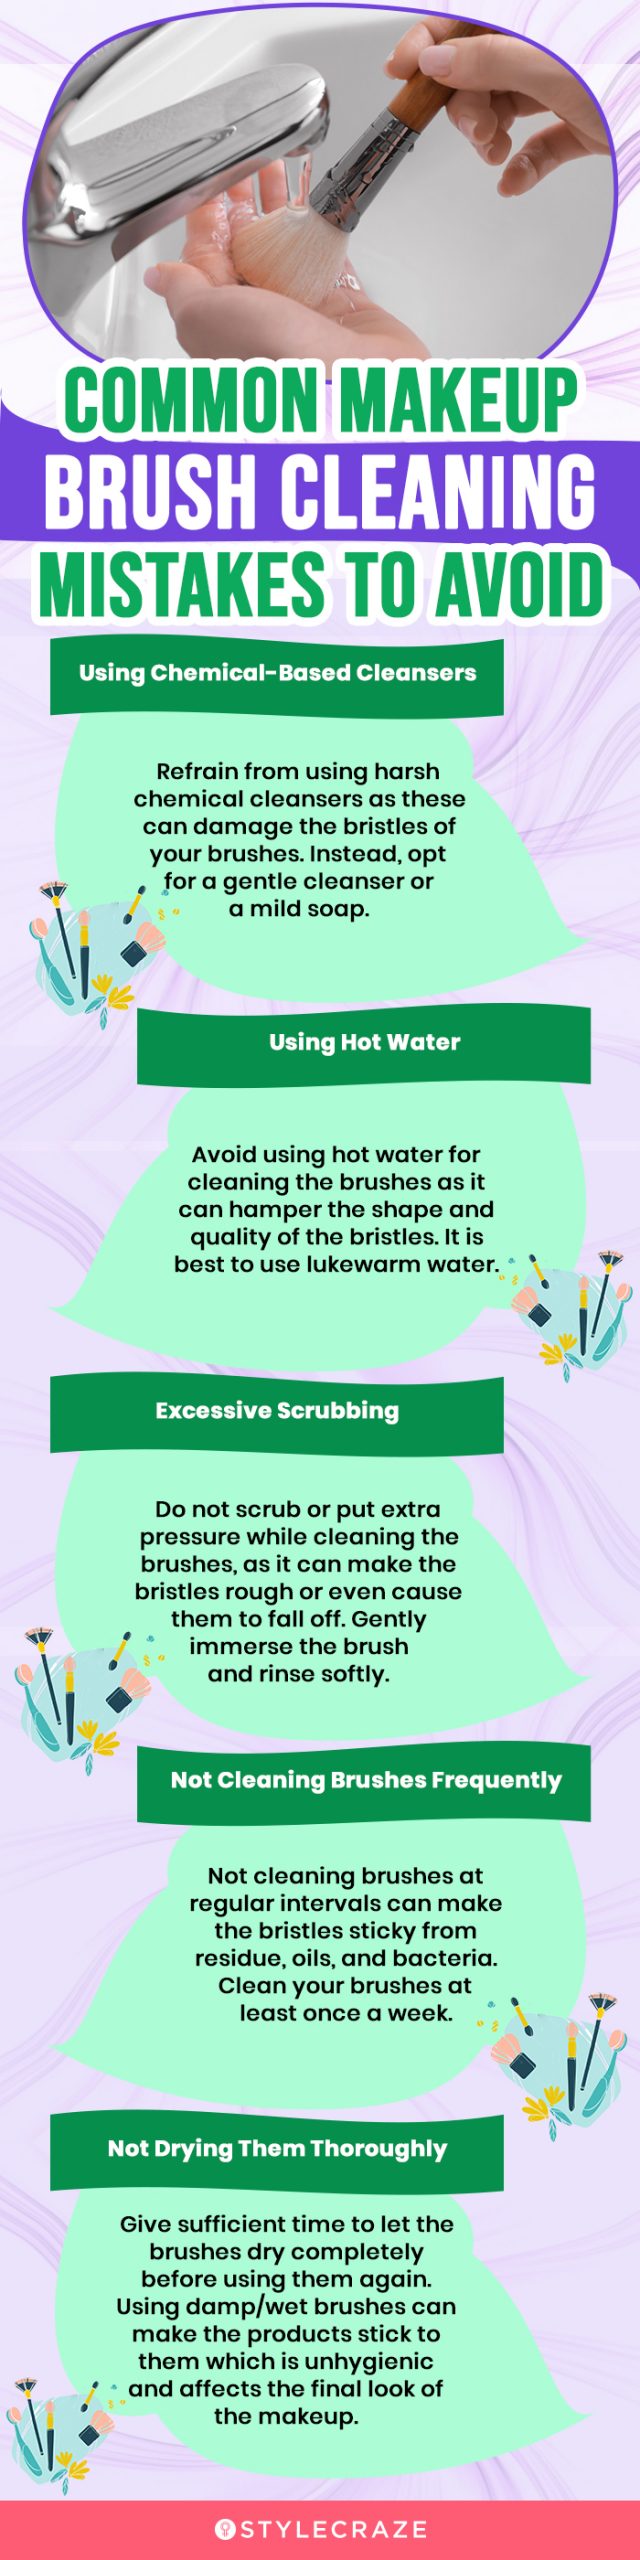 Common Makeup Brush Cleaning Mistakes To Avoid (infographic)